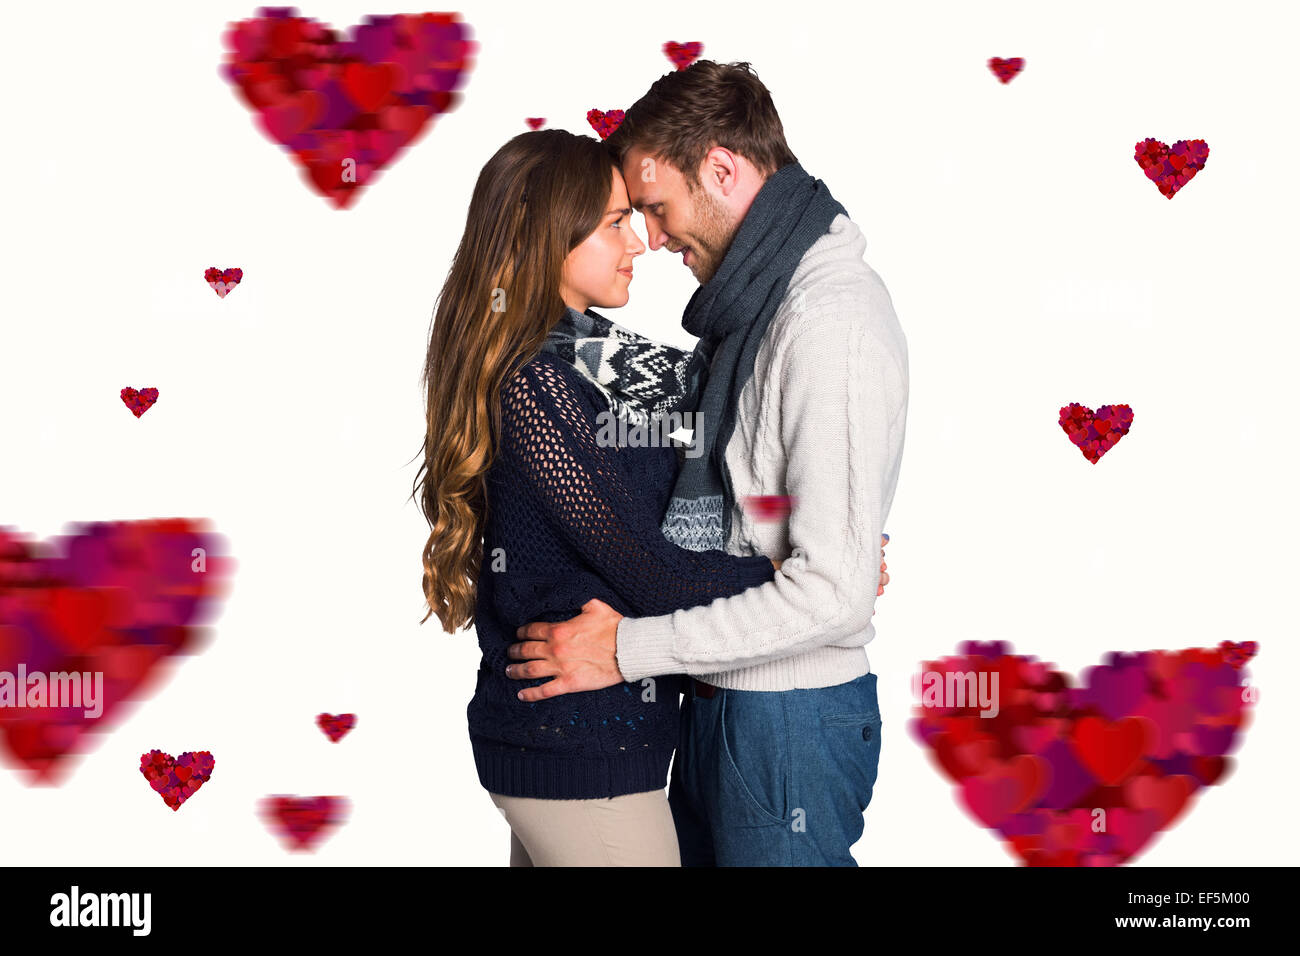 Composite image of side view of young couple embracing Stock Photo